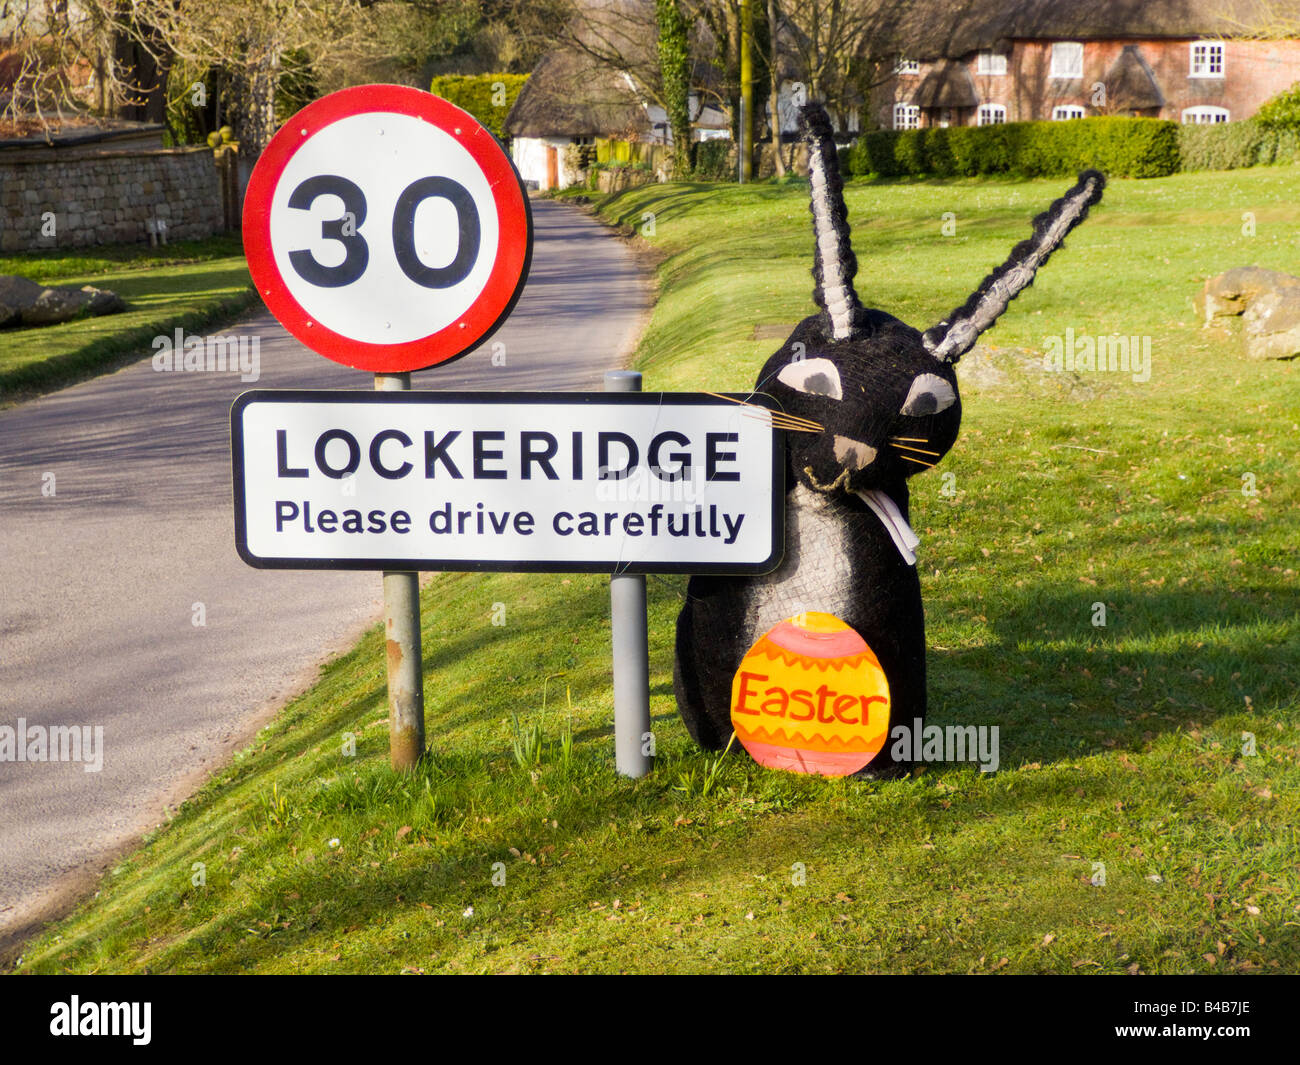 Lockeridge village Wiltshire England Easter bunny by village sign 30 mph miles per hour speed limit restriction Stock Photo